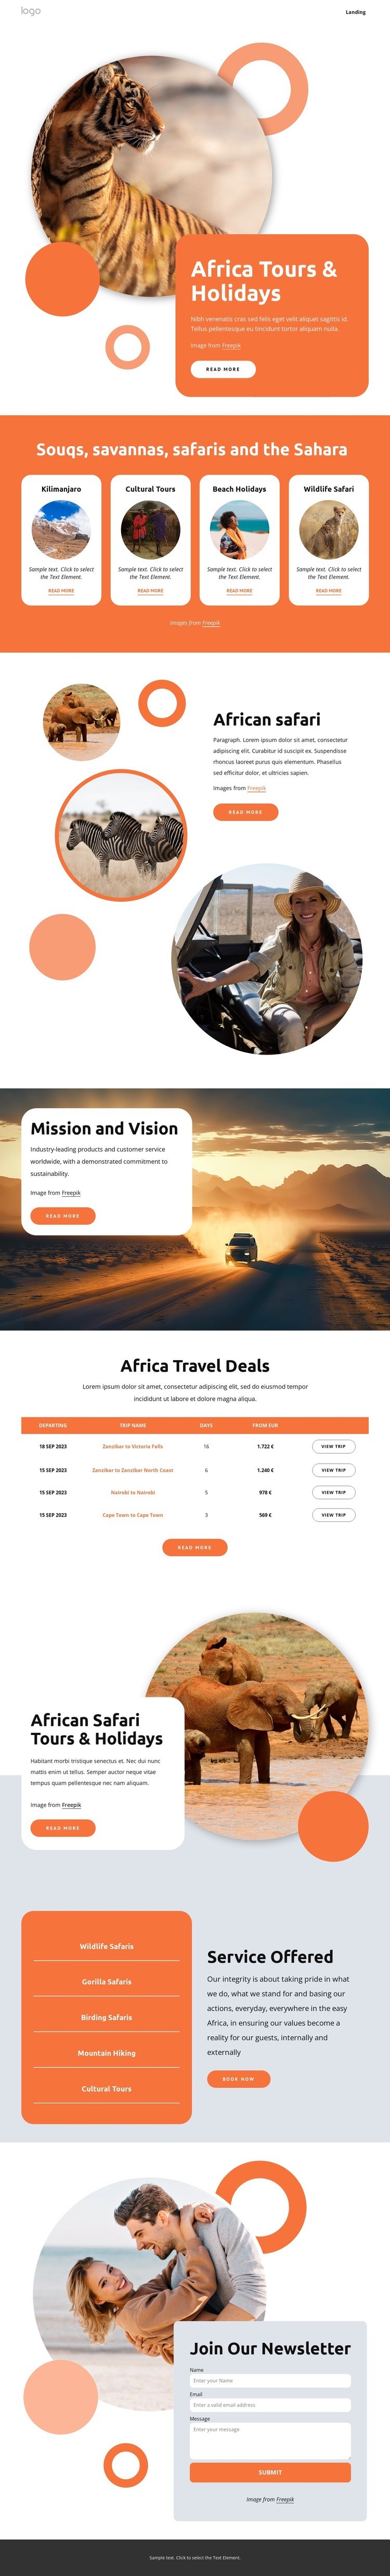 Africa tours and holidays Homepage Design